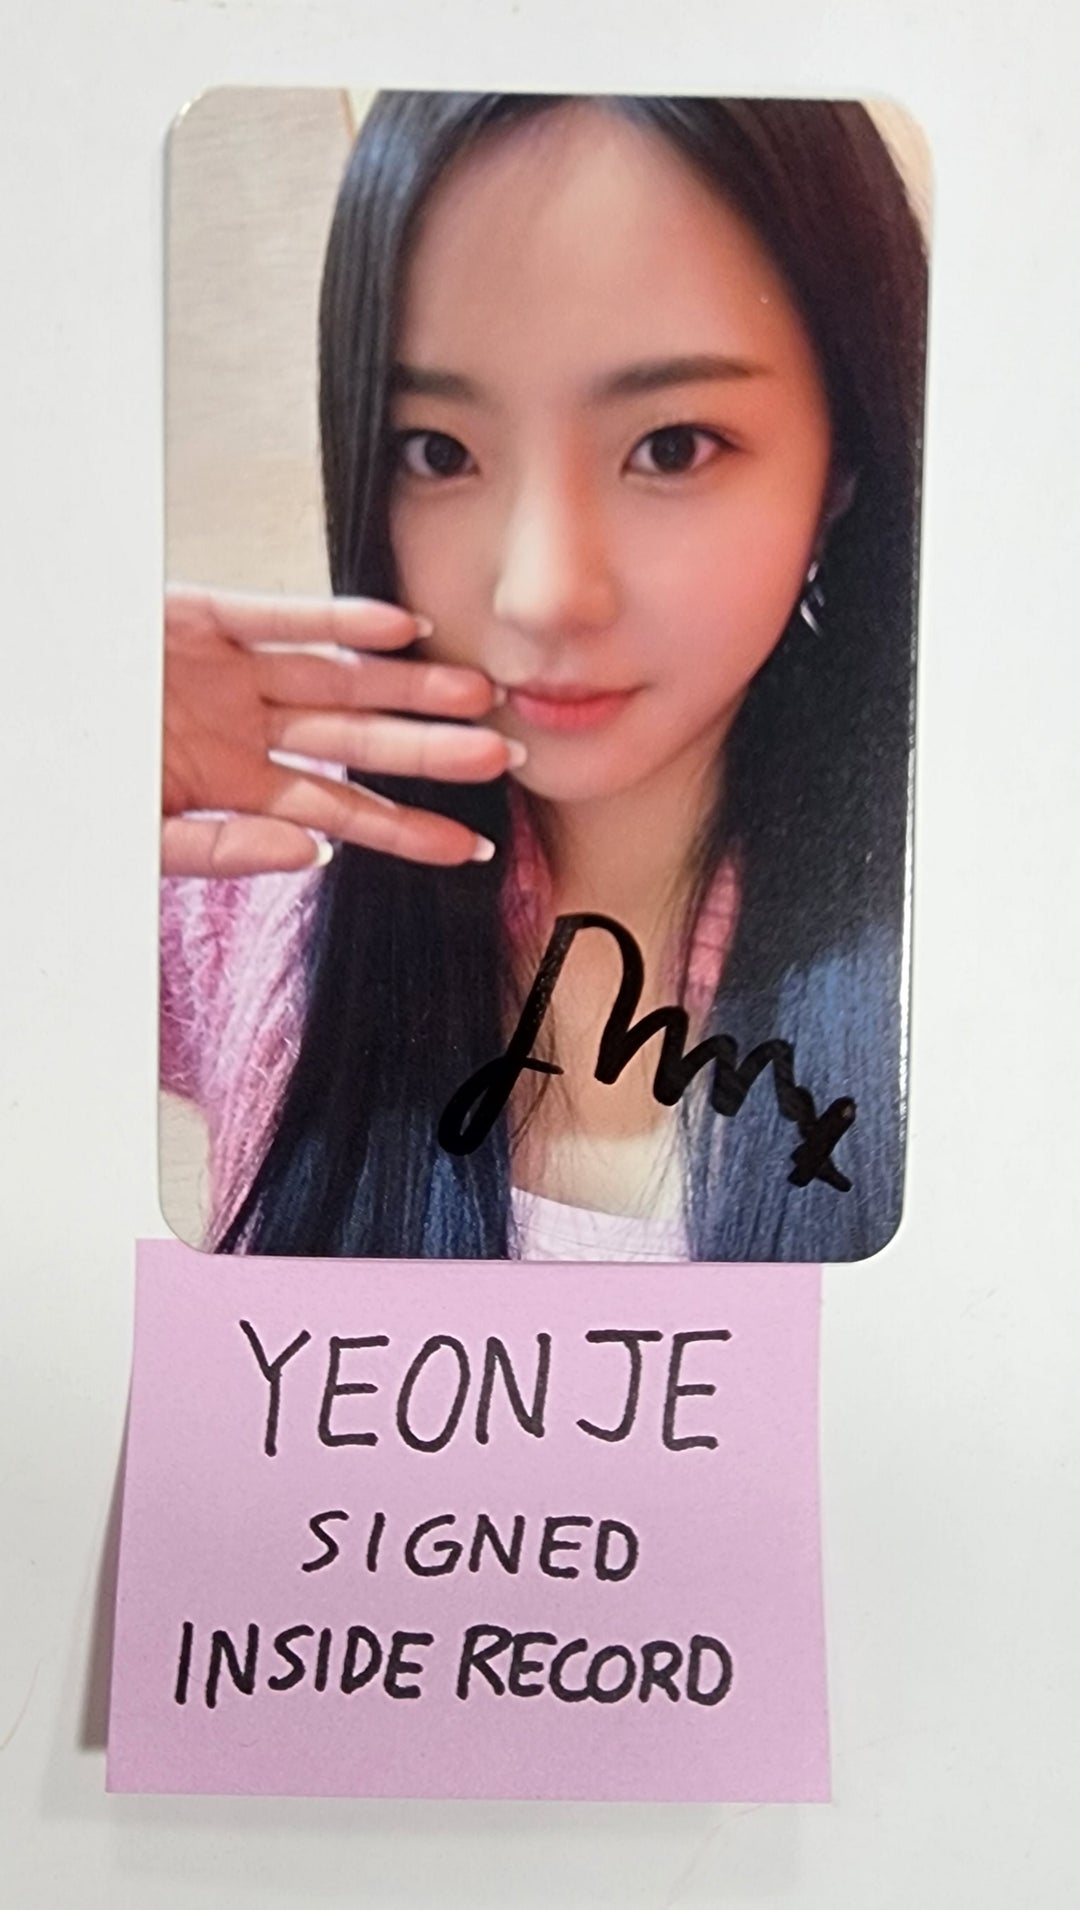 Yeon Je (of ALICE) "DANCE ON" - Hand Autographed(Signed) Photocard